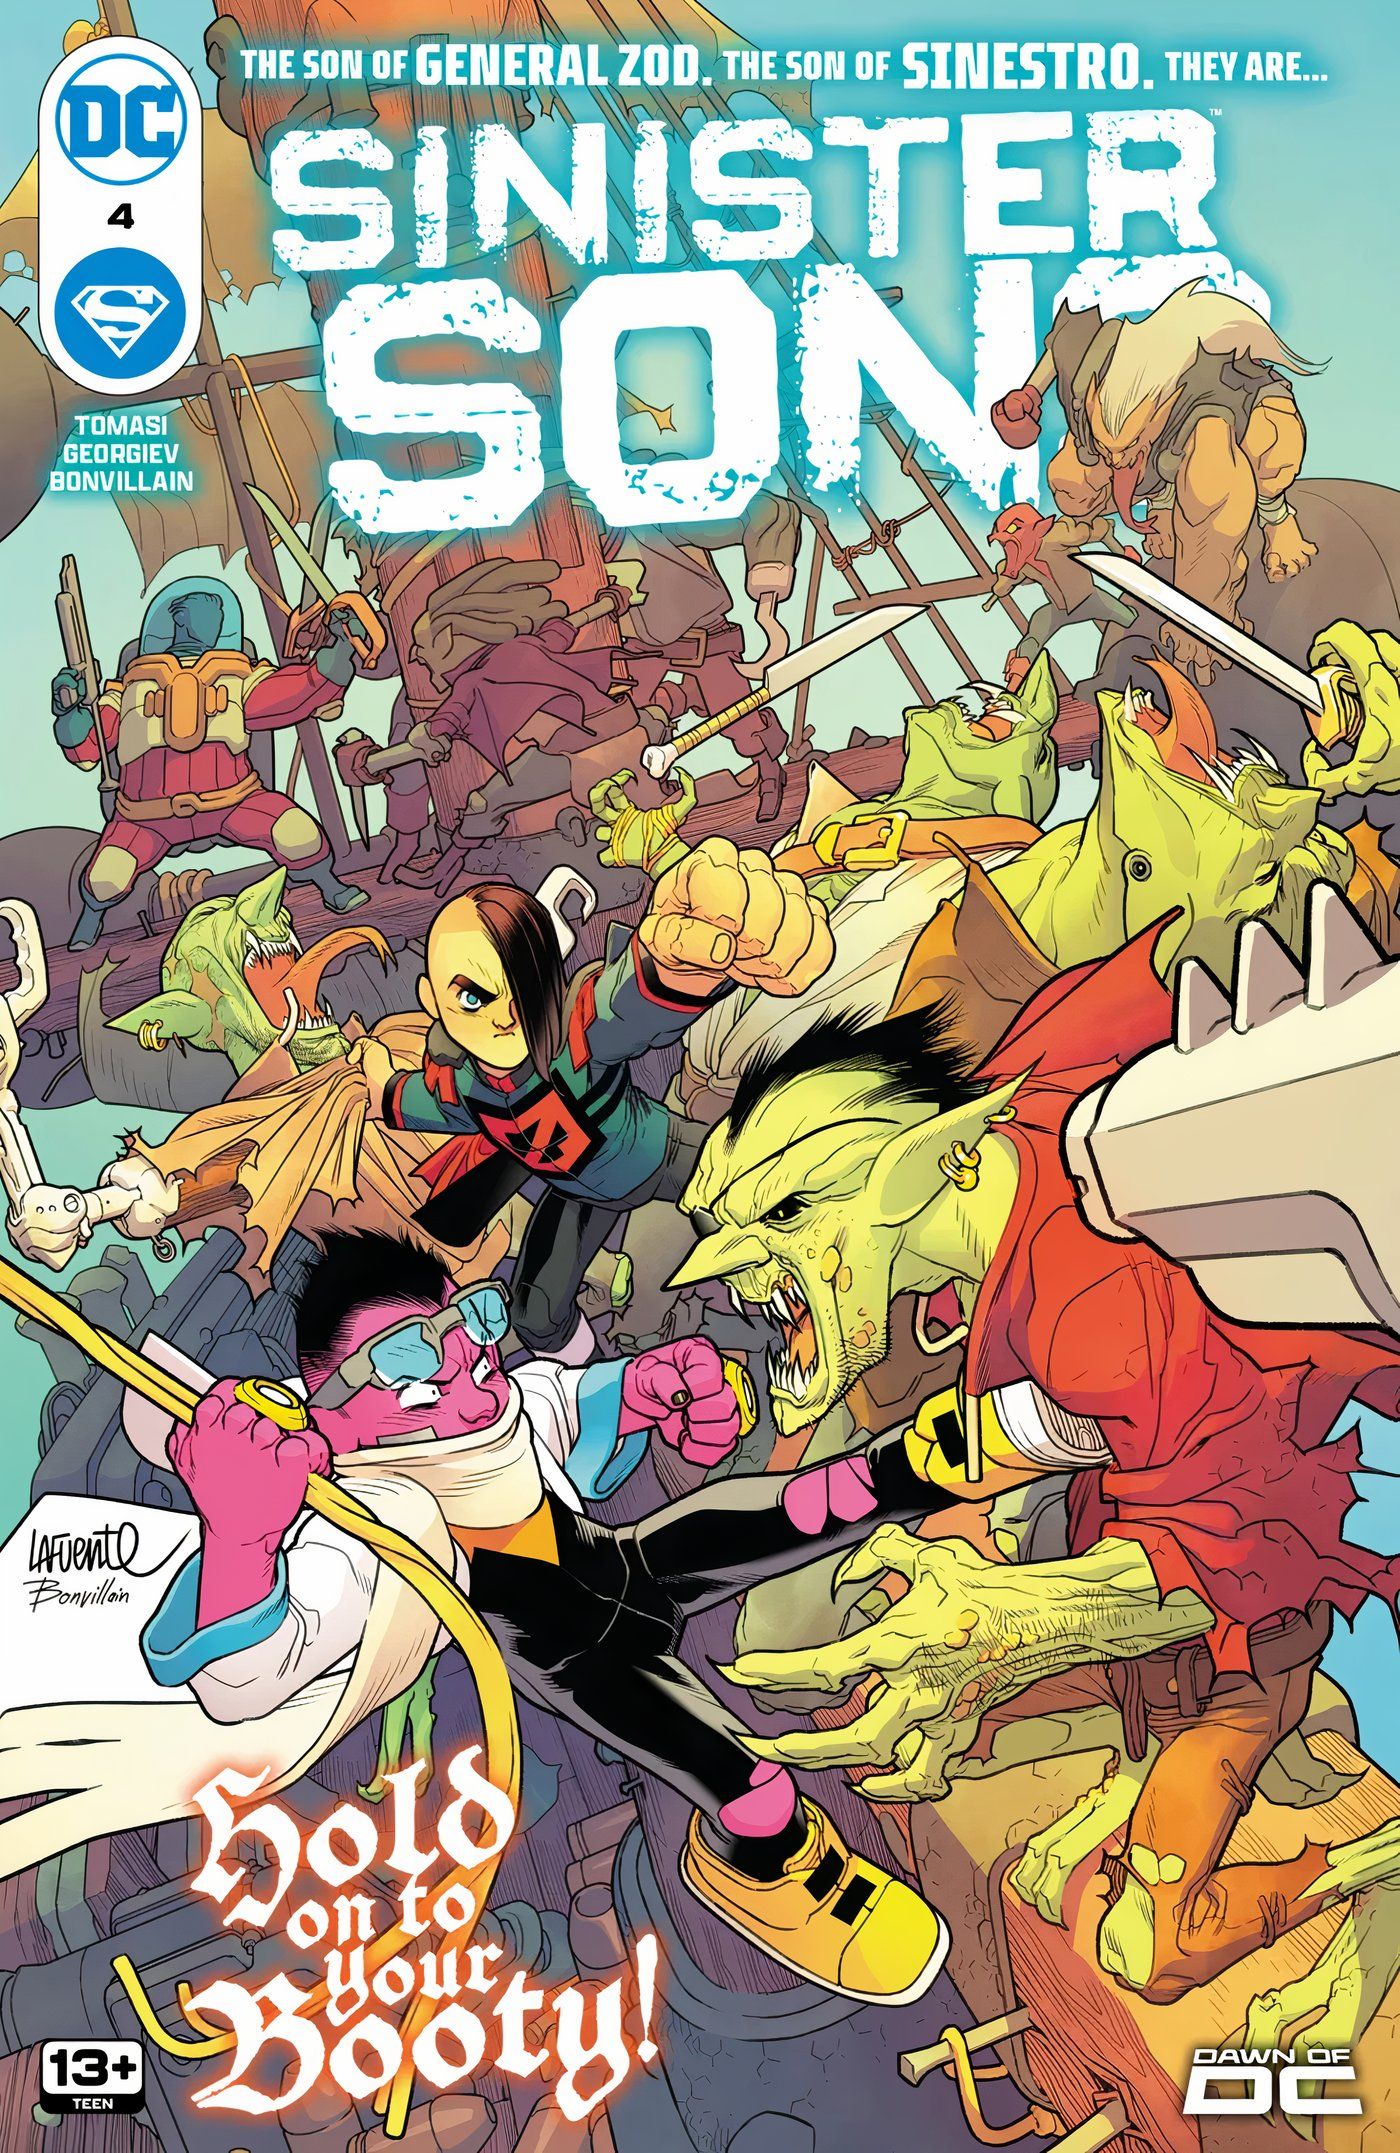 Sinister Sons #4 cover, featuring the newly introduced 'piratesites